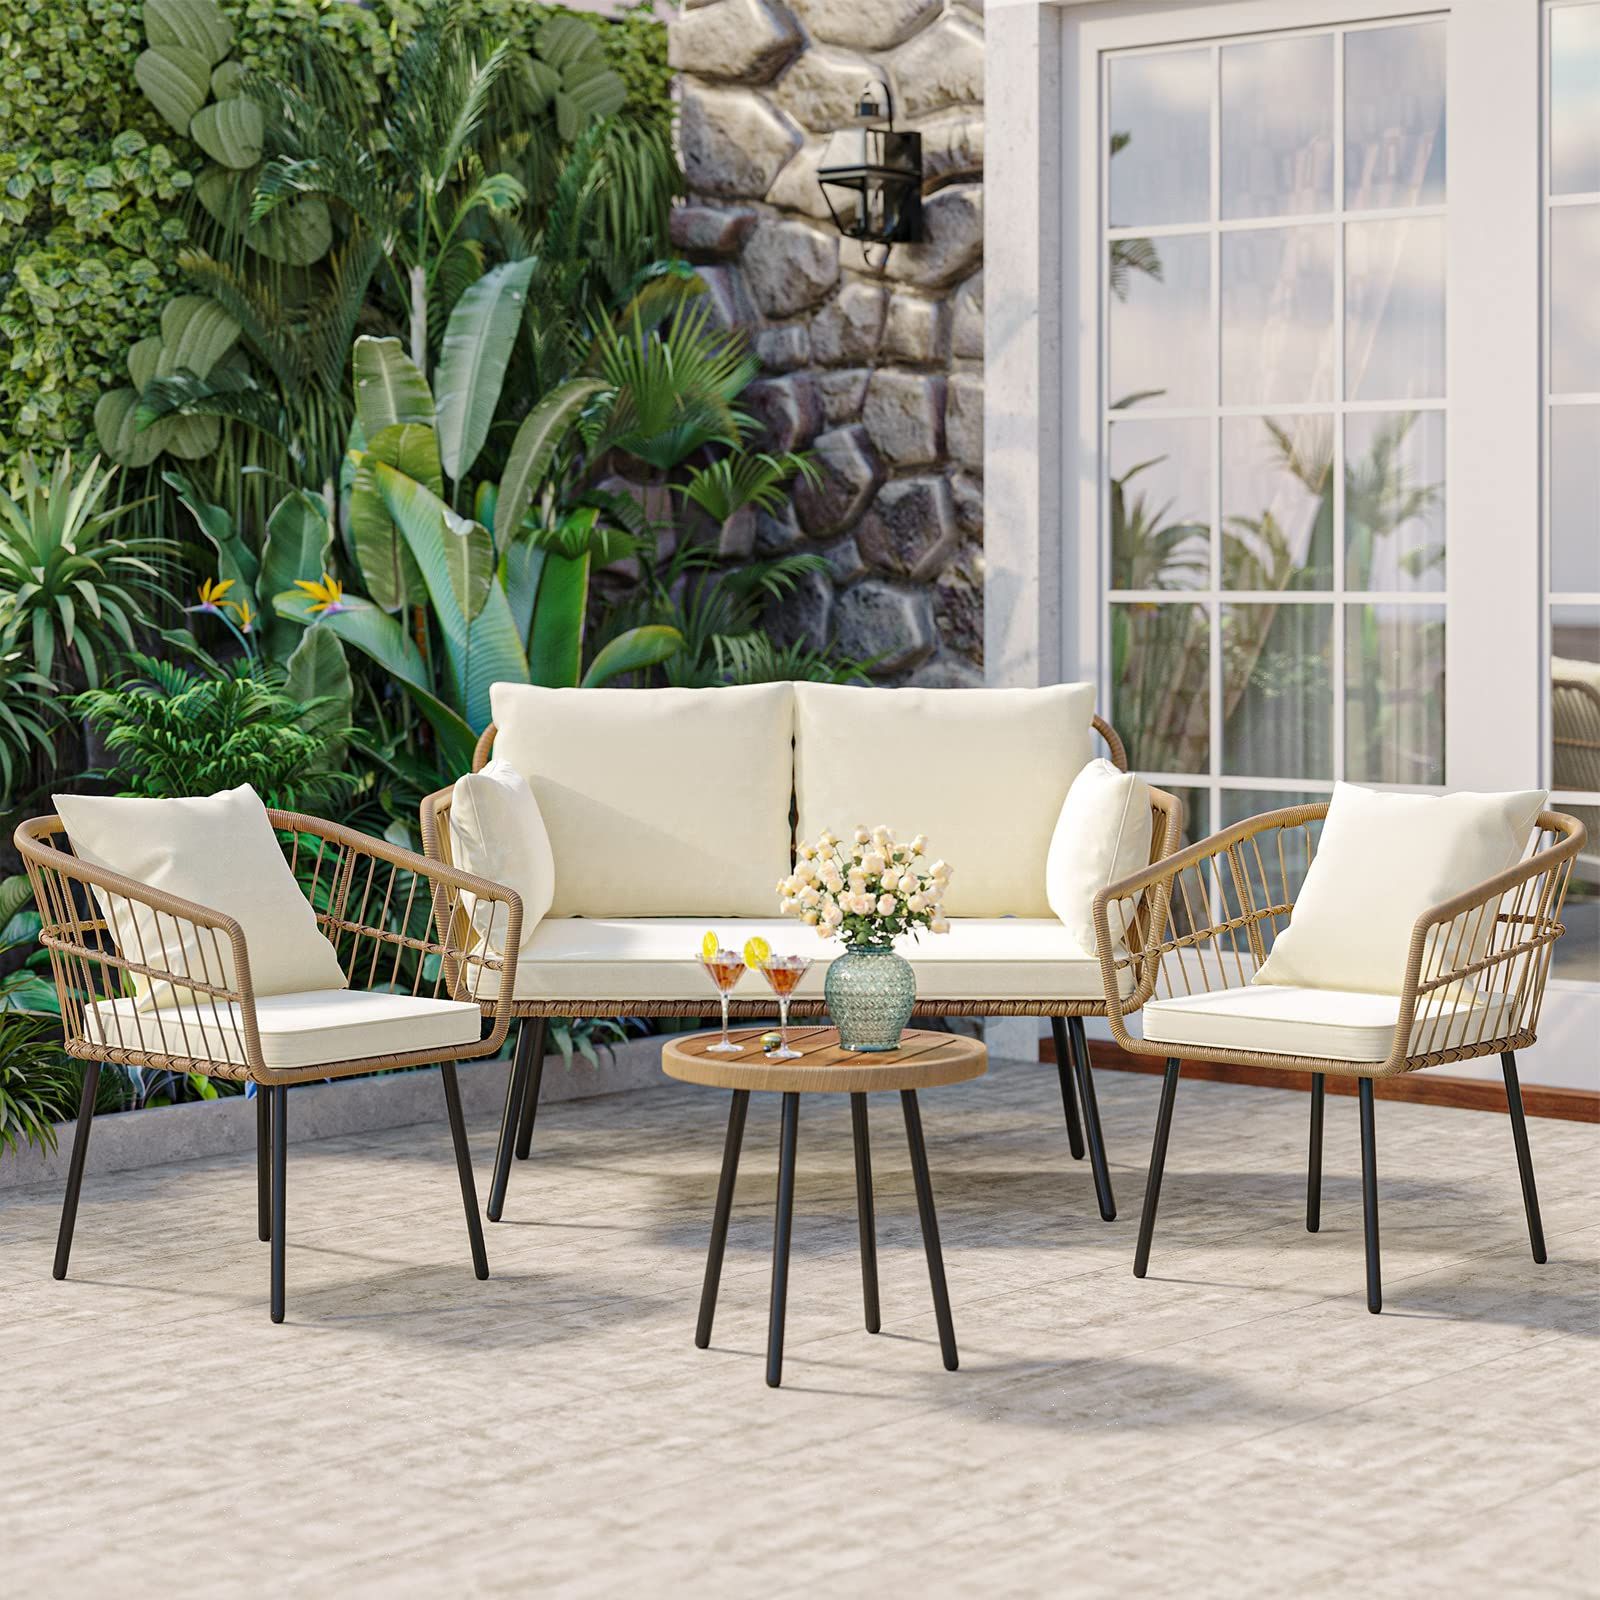 Cushioned Chair Loveseat Tables With Well Liked Amazon: Yitahome 4 Pieces Patio Furniture Set, Wicker Balcony Bistro  Set, Outdoor All Weather Rattan Conversation Set With Loveseat Chairs Table  Soft Cushions For Backyard, Pool, Deck, Garden – Beige : Patio, Lawn (View 5 of 15)